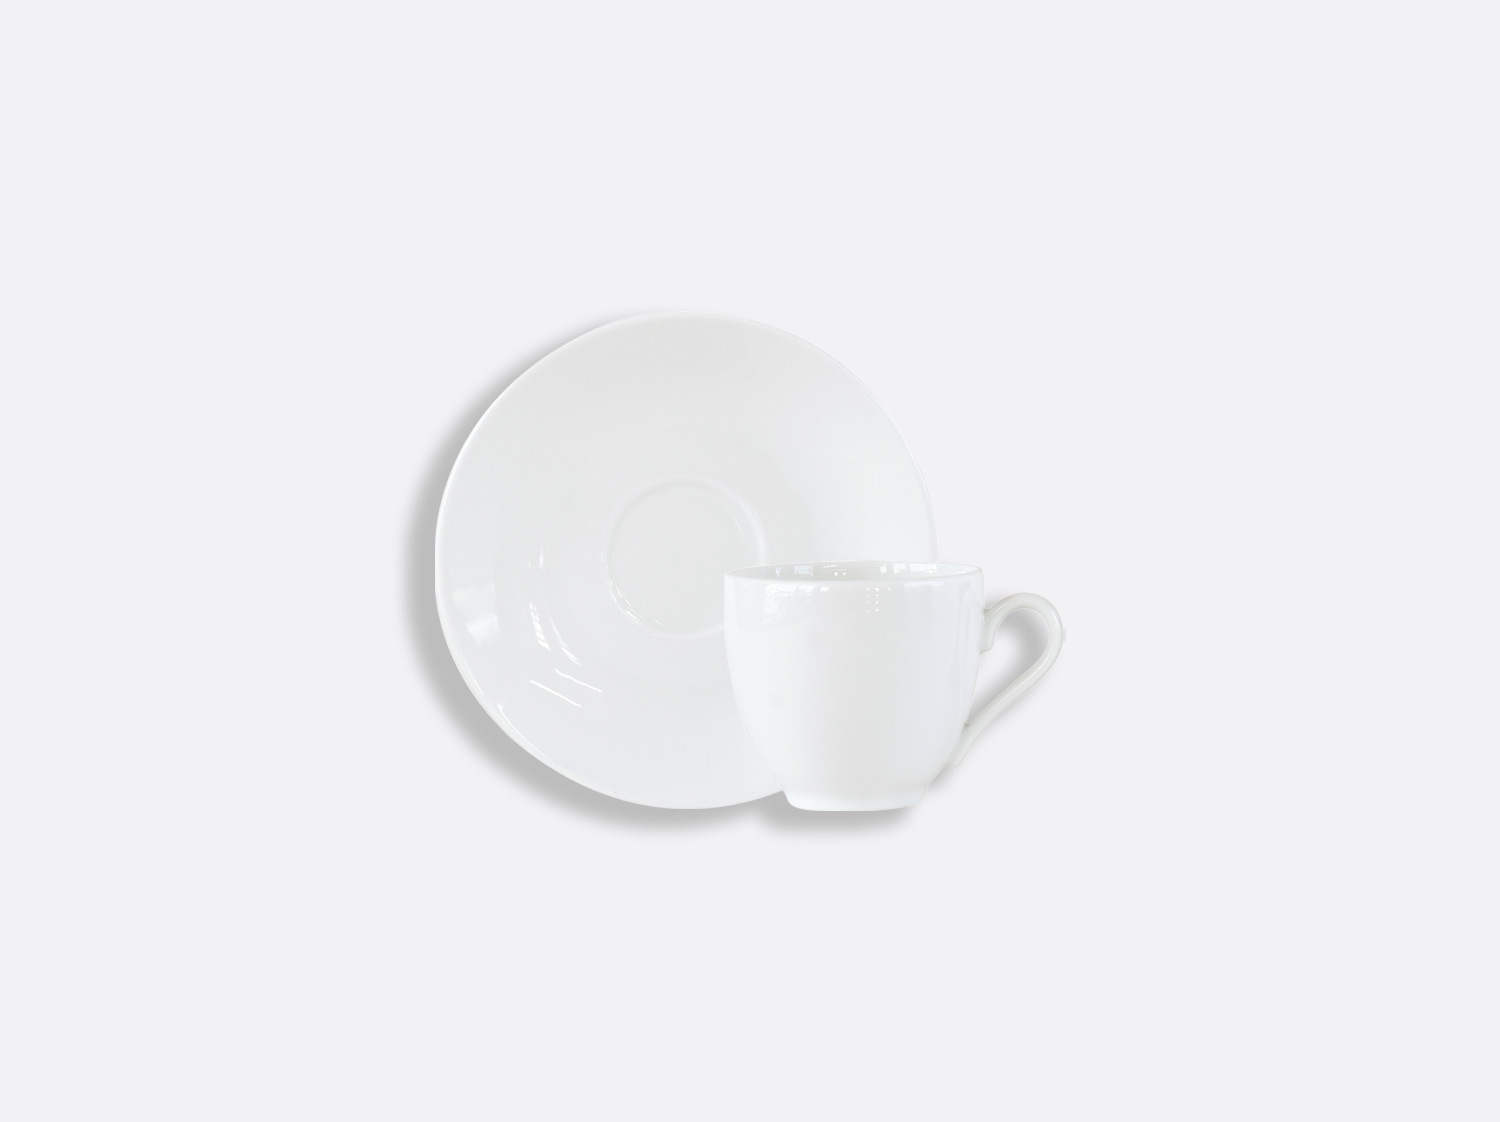 China Boule espresso cup and saucer 3.3 oz of the collection Boule blanc | Bernardaud